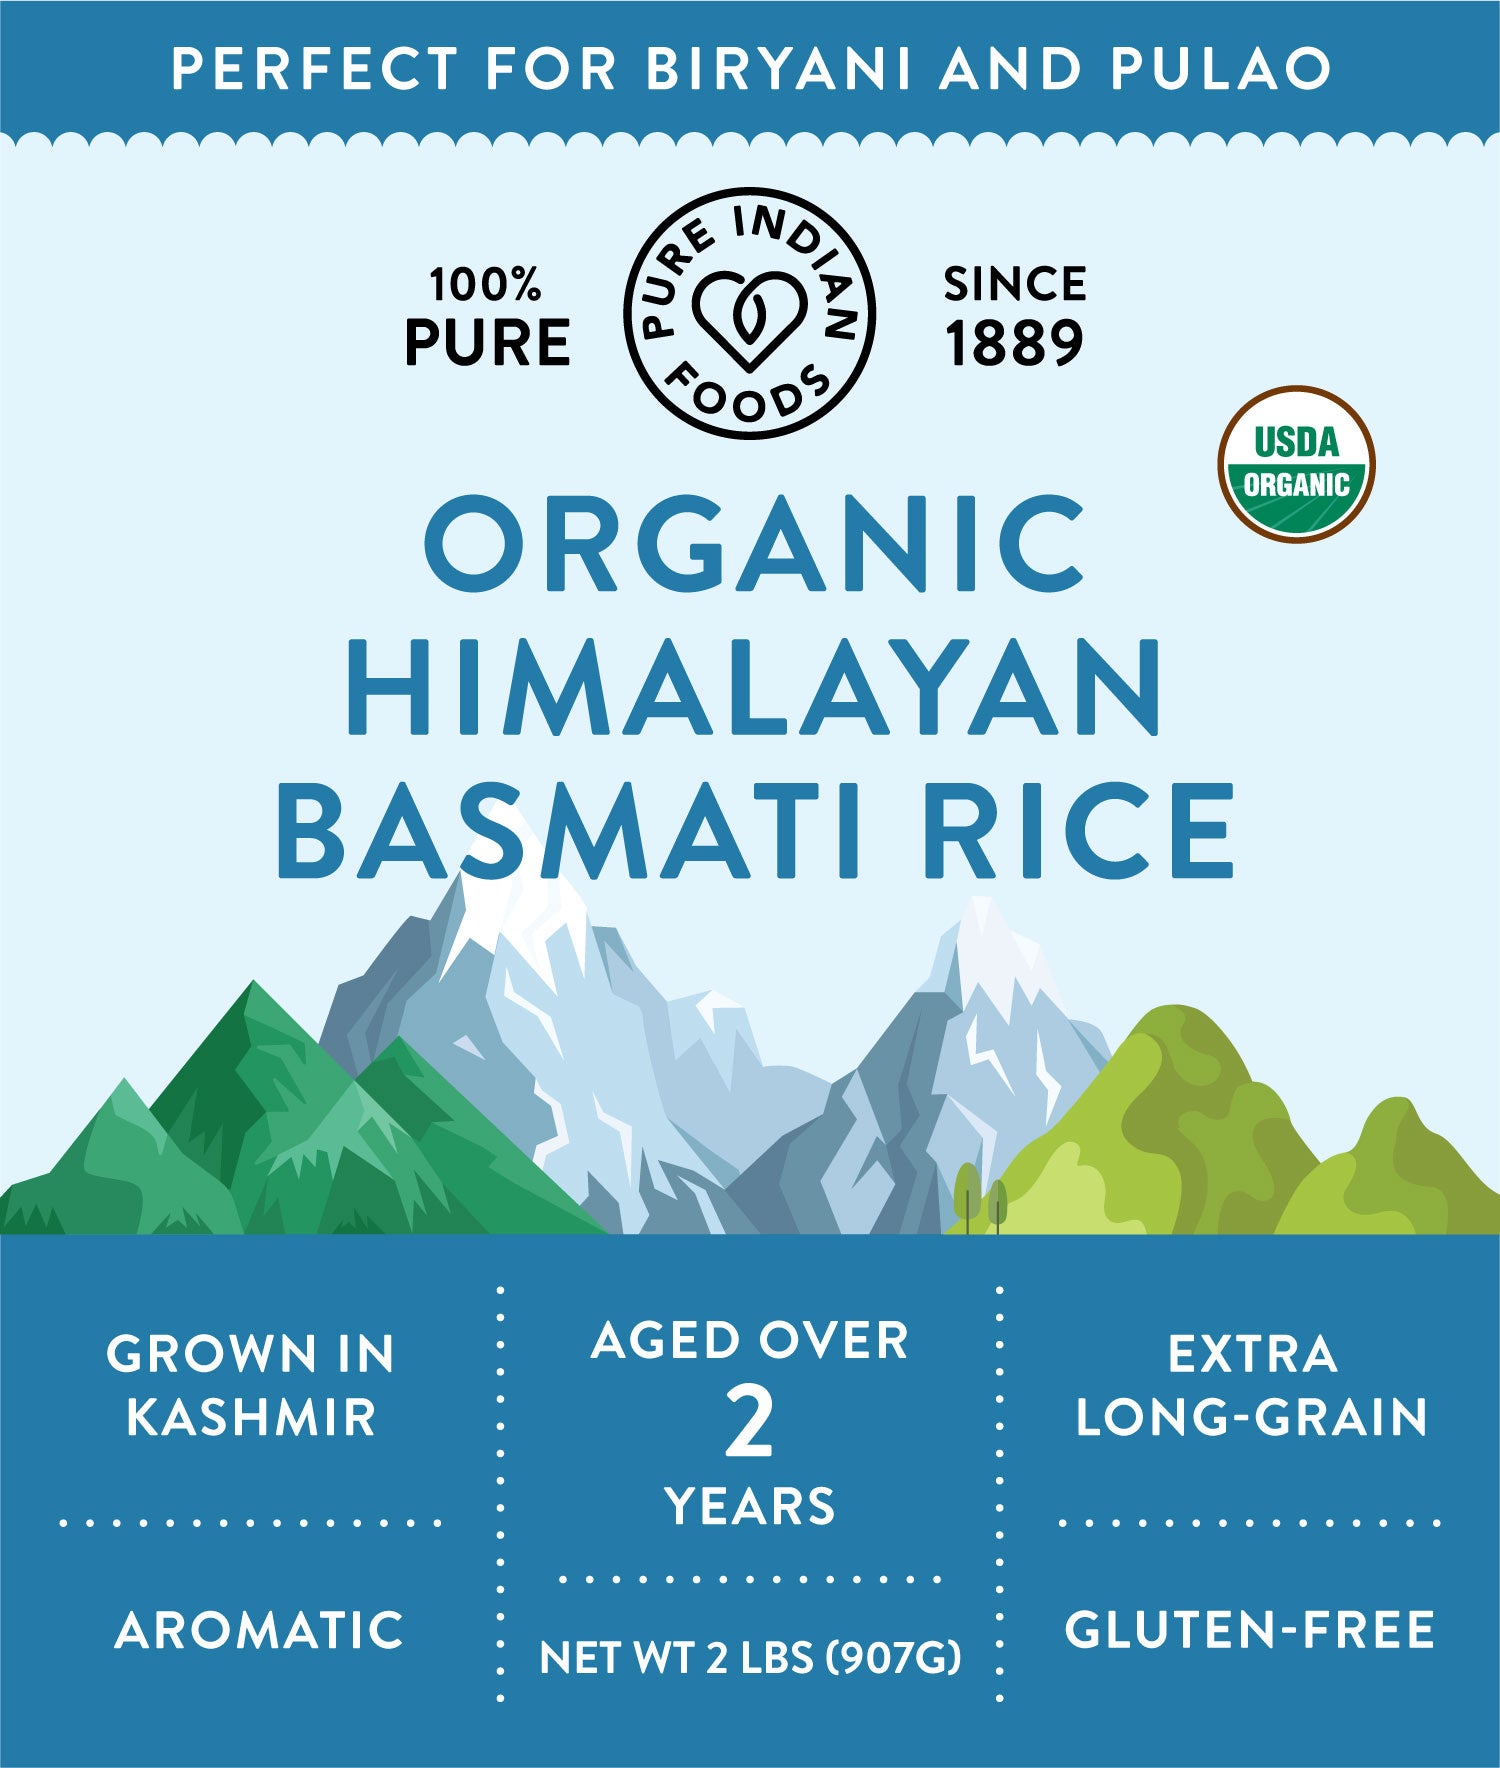 Package of Pure Indian Foods Himalayan Organic Basmati Rice. Extra long-grain. Grown in Kashmir. Aged over 2 years. Aromatic.